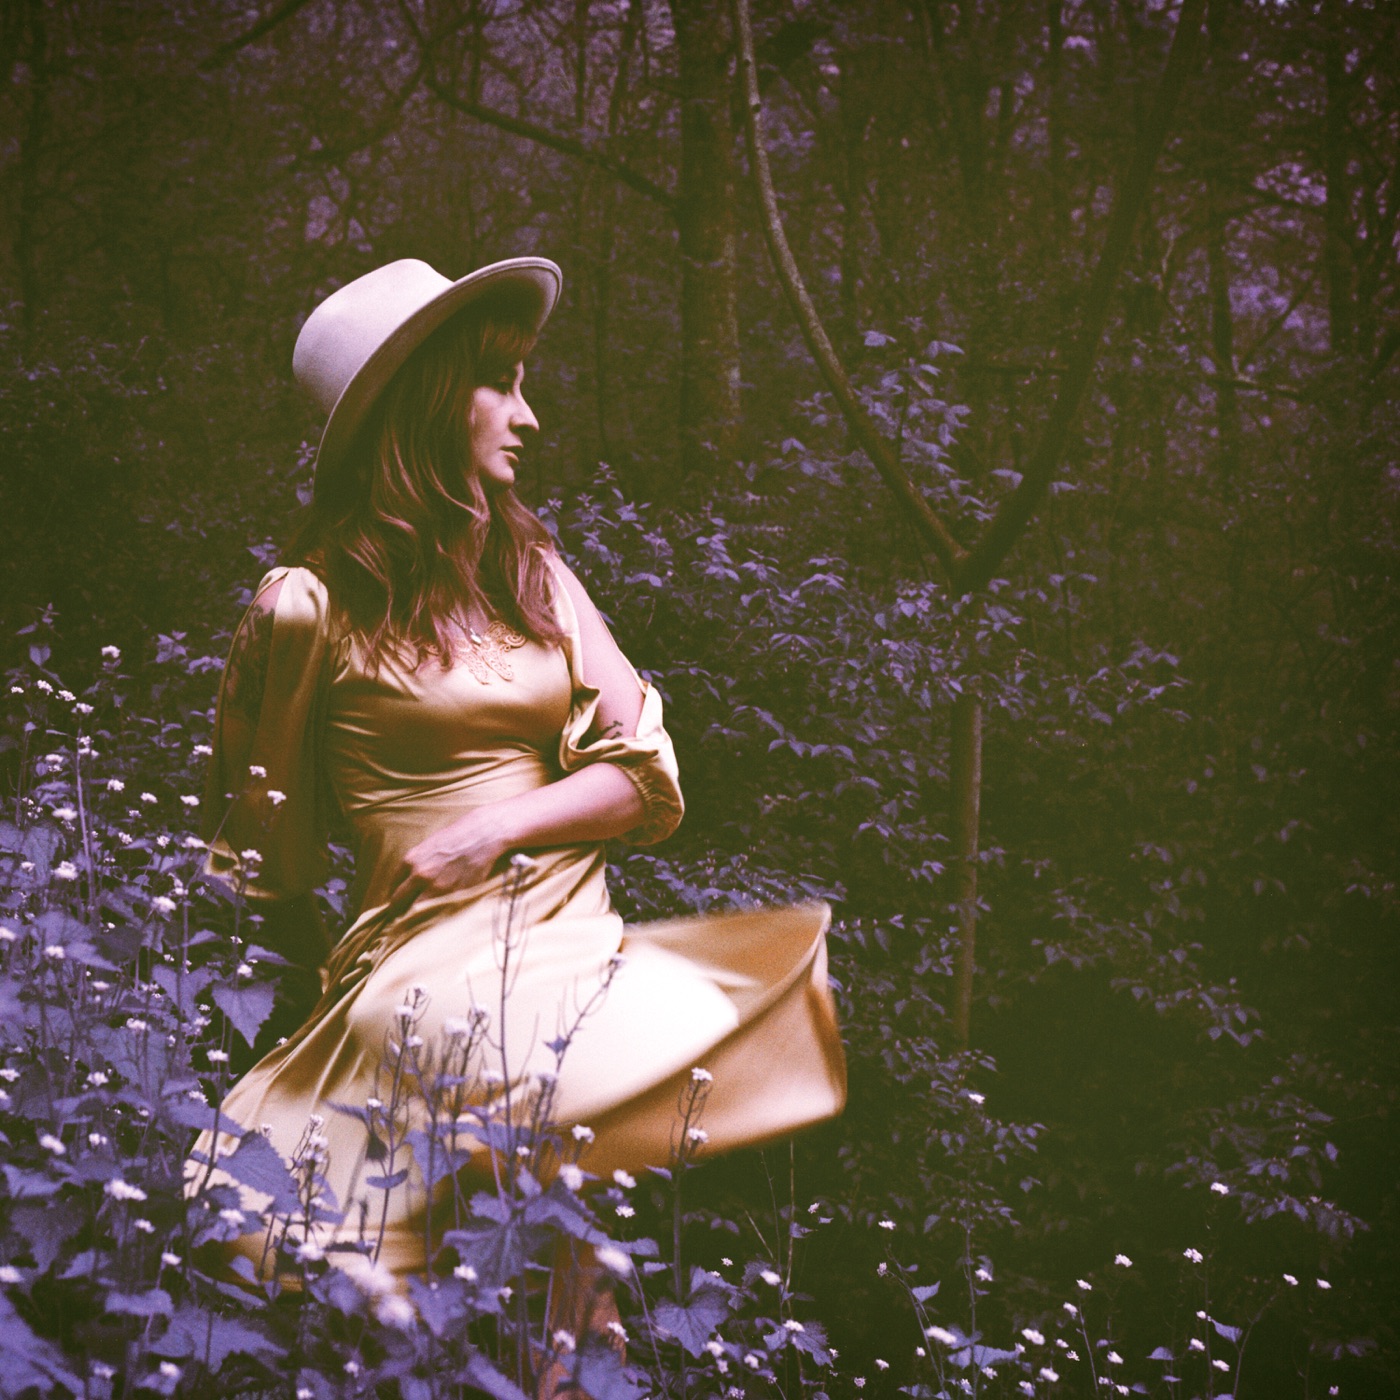 Midwest Farmer's Daughter by Margo Price